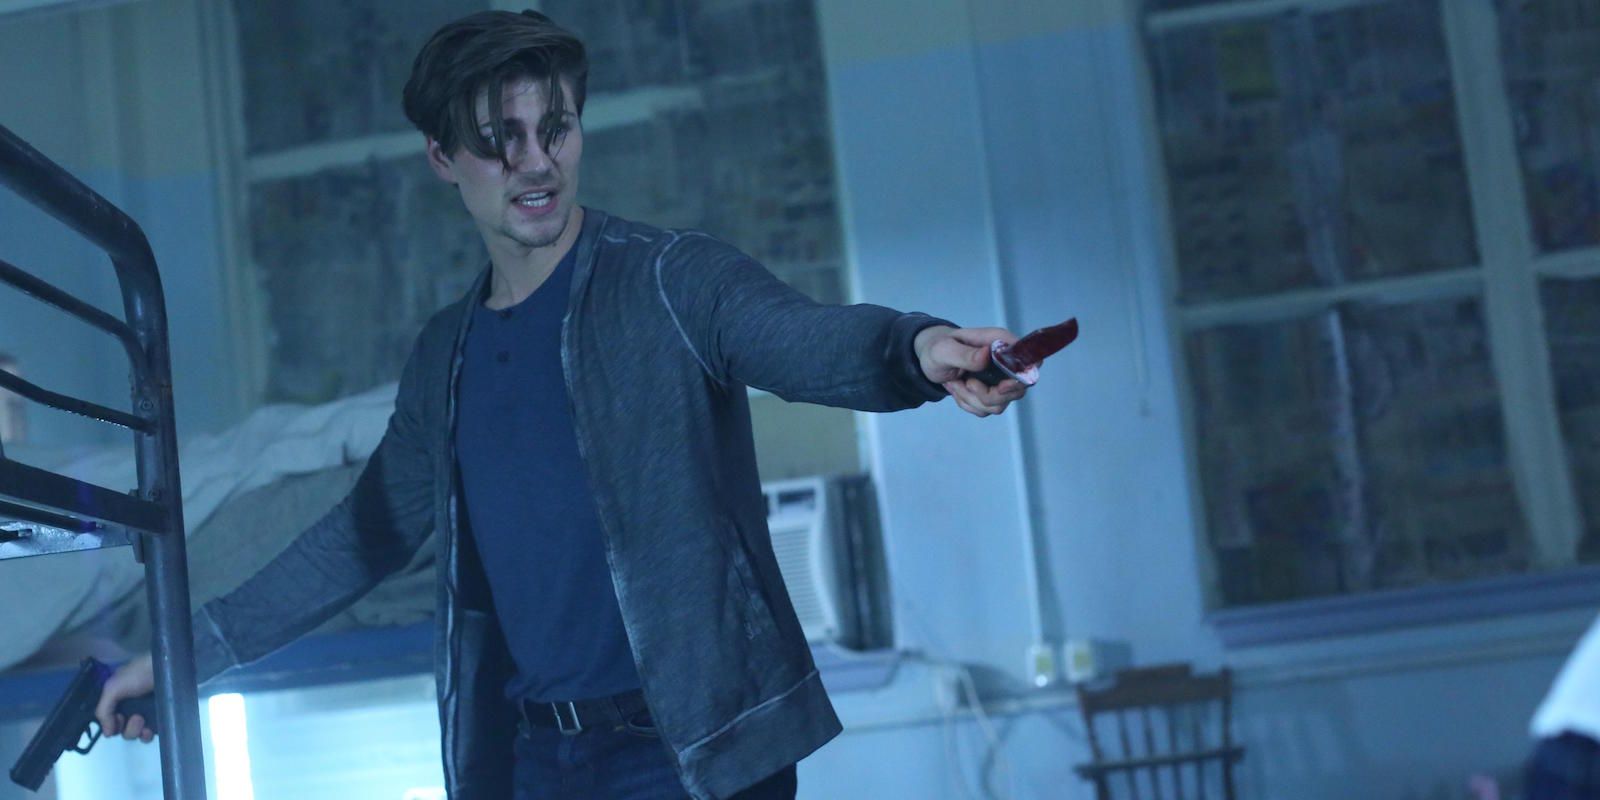 Kierani holds a gun and wields a bloody knife in the TV show Scream.